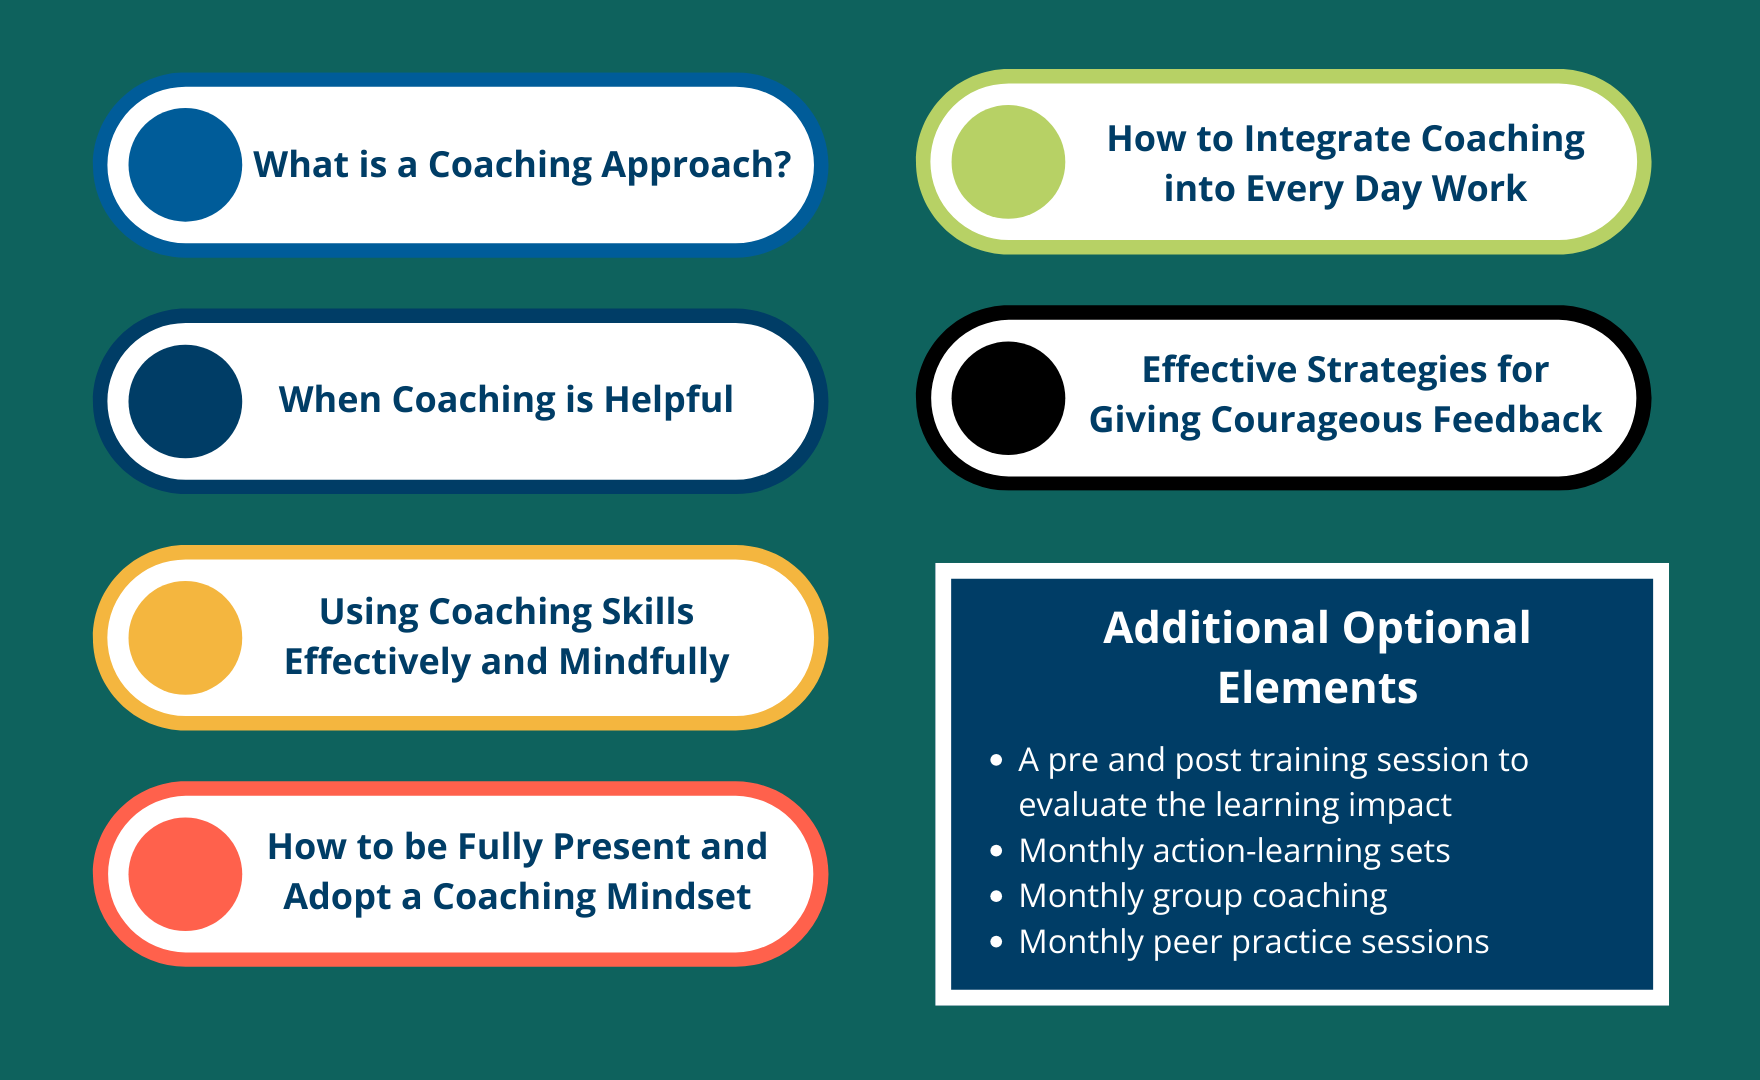 Coaching as a line manager programme structure